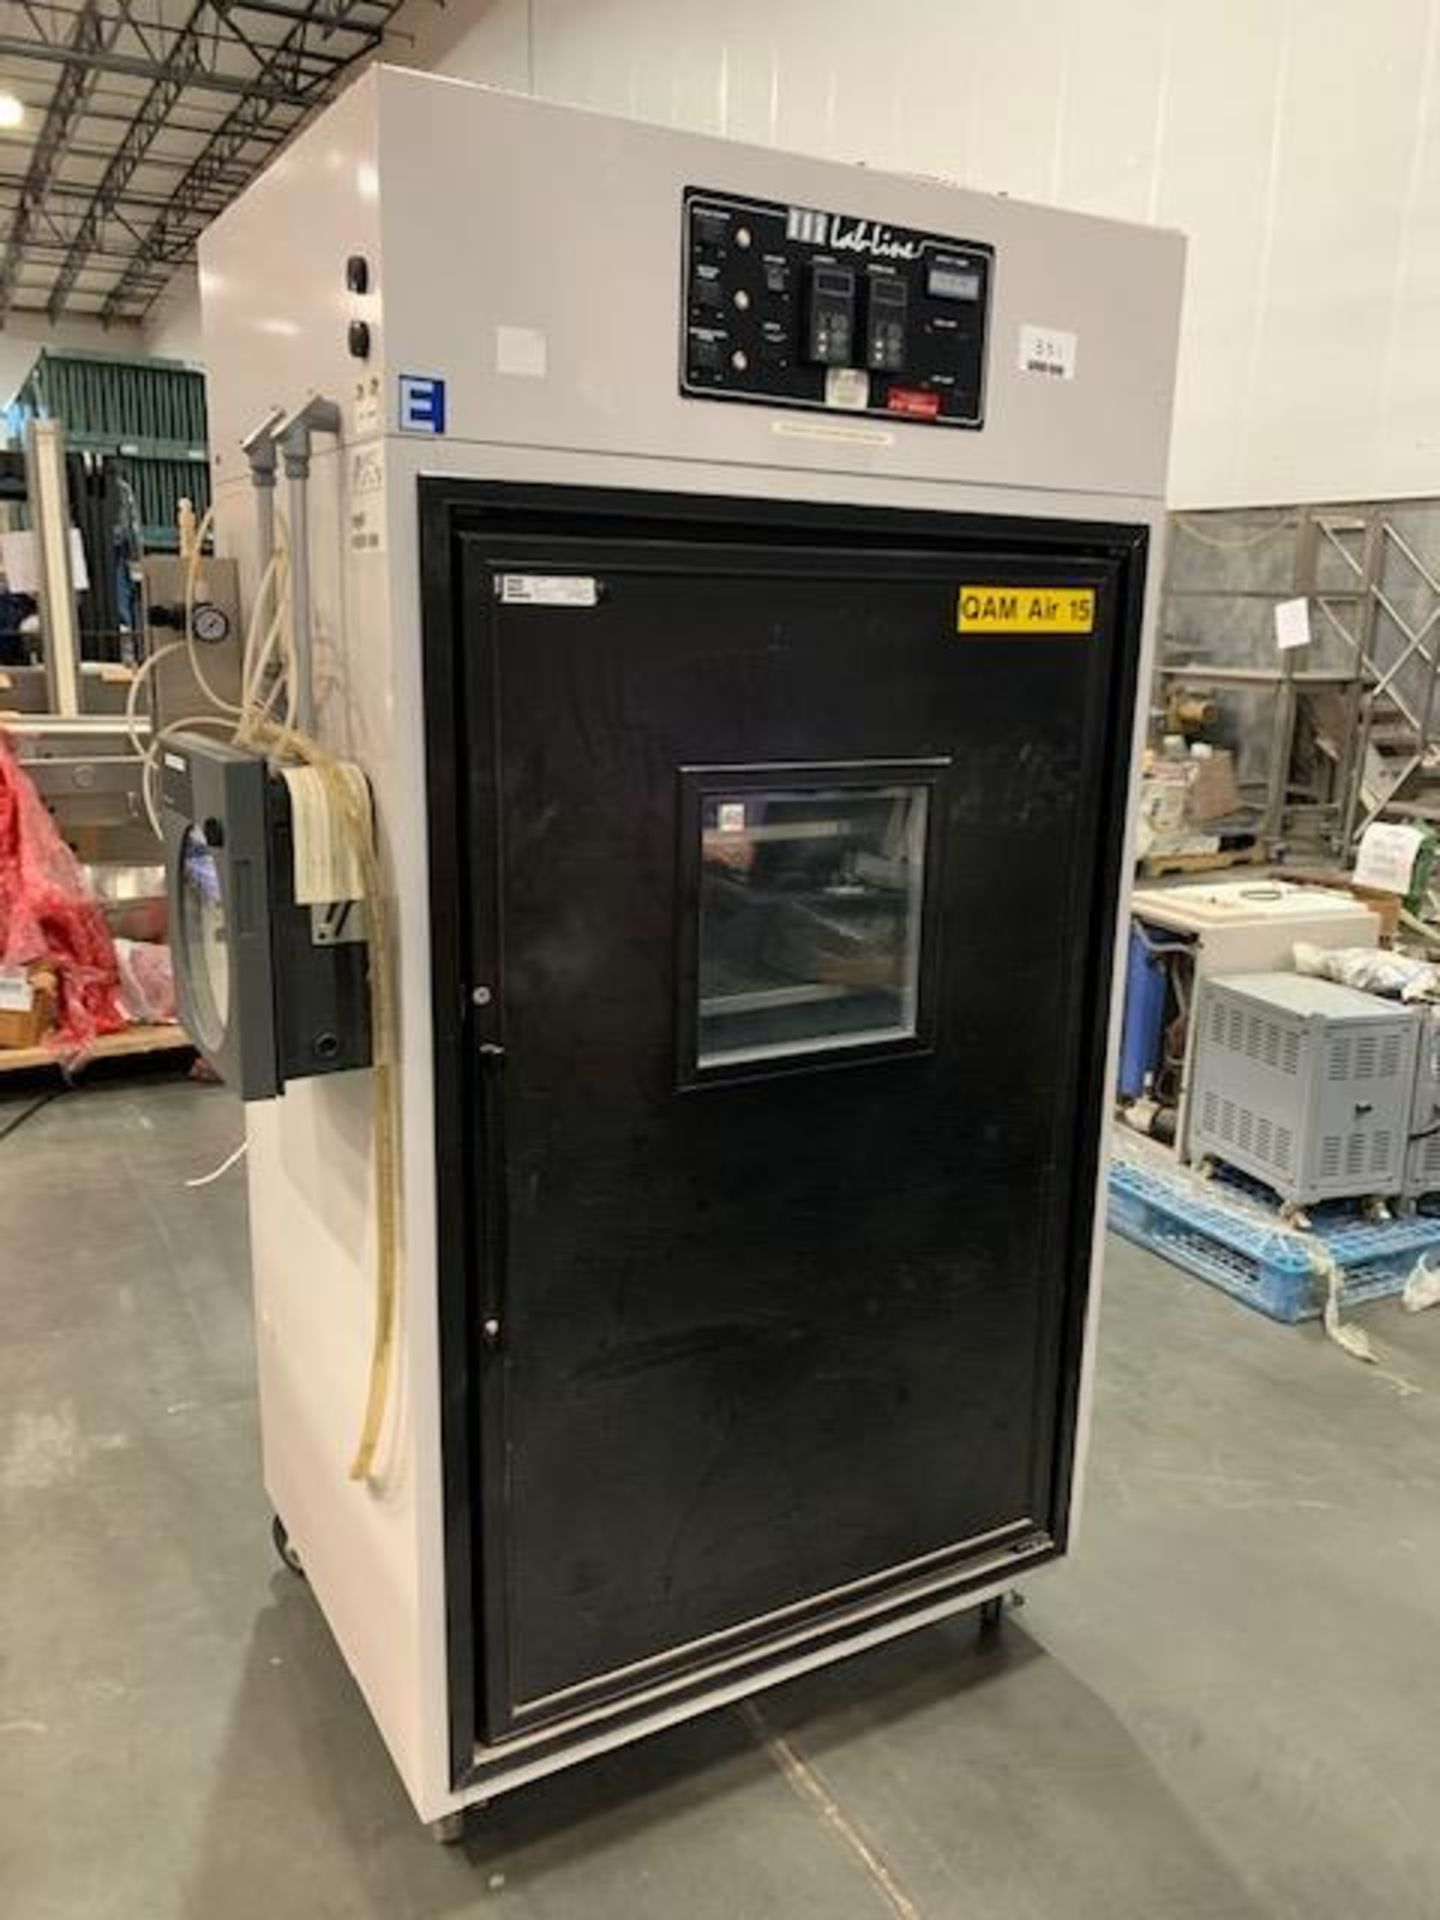 Lab Line model EC32560,Incubator with humidity and temperature controls. 36" wide x 24" deep x 55"